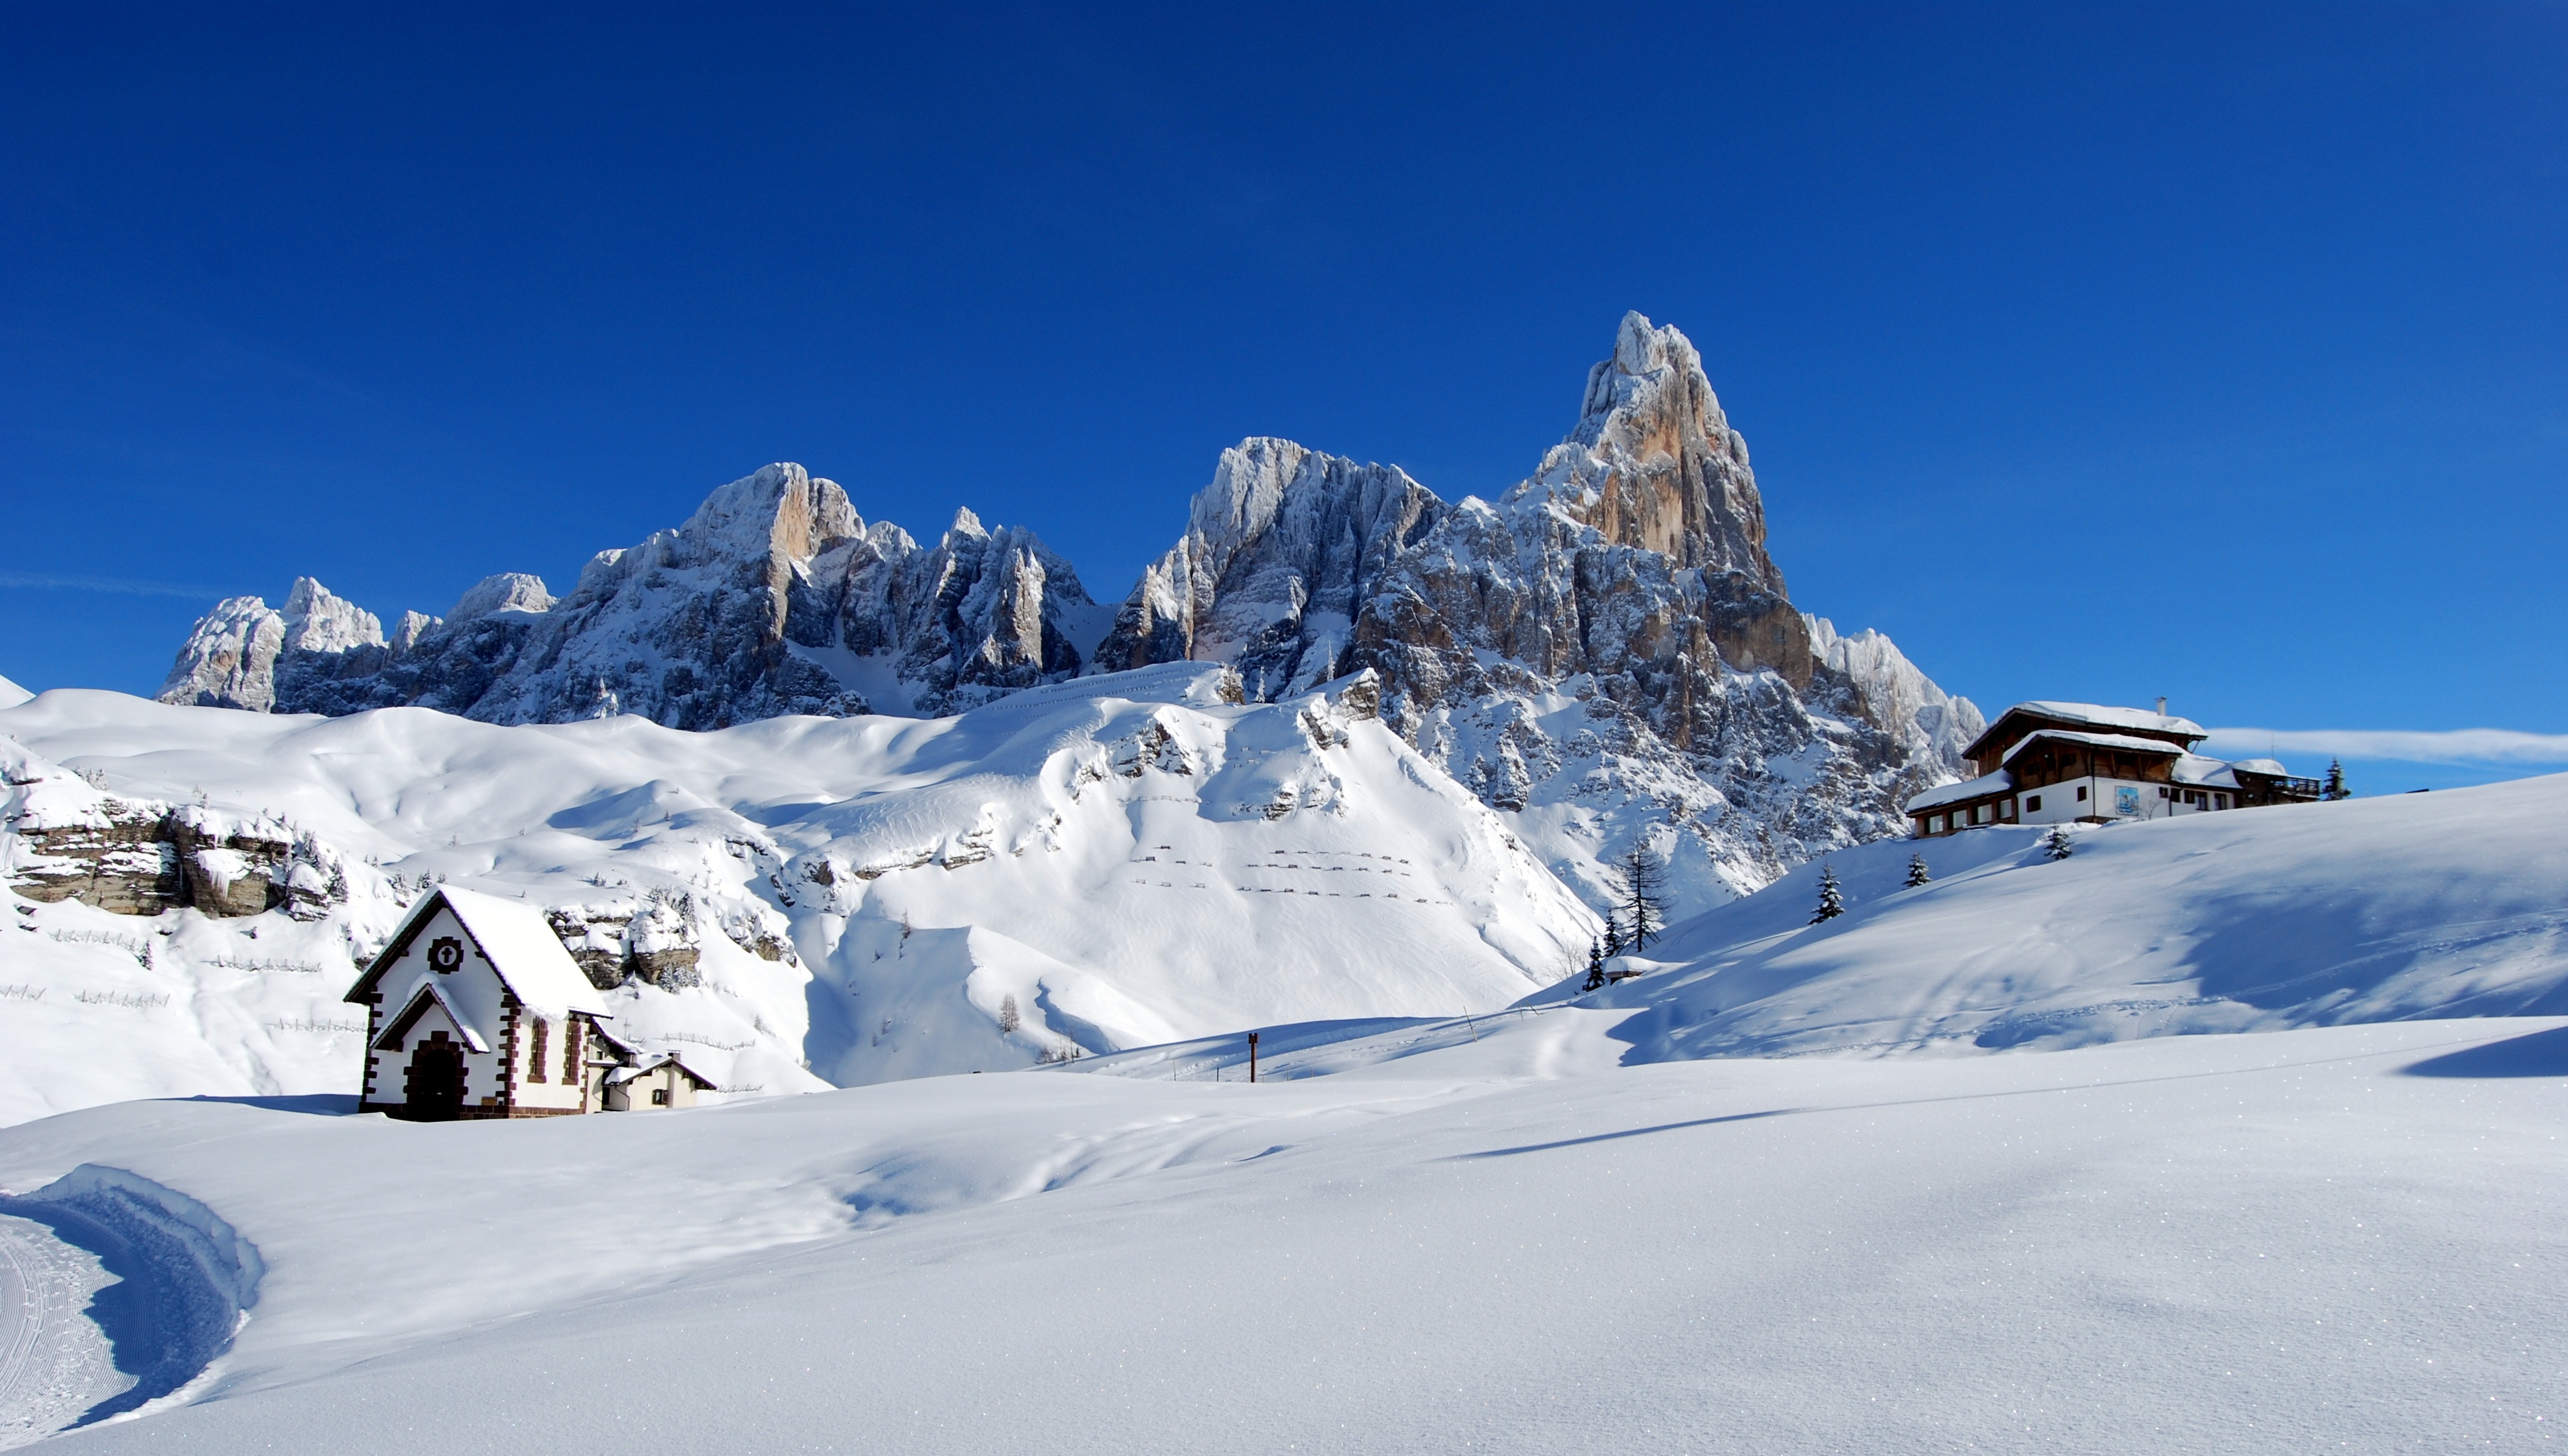 Snow dolomites in the Alps free image download